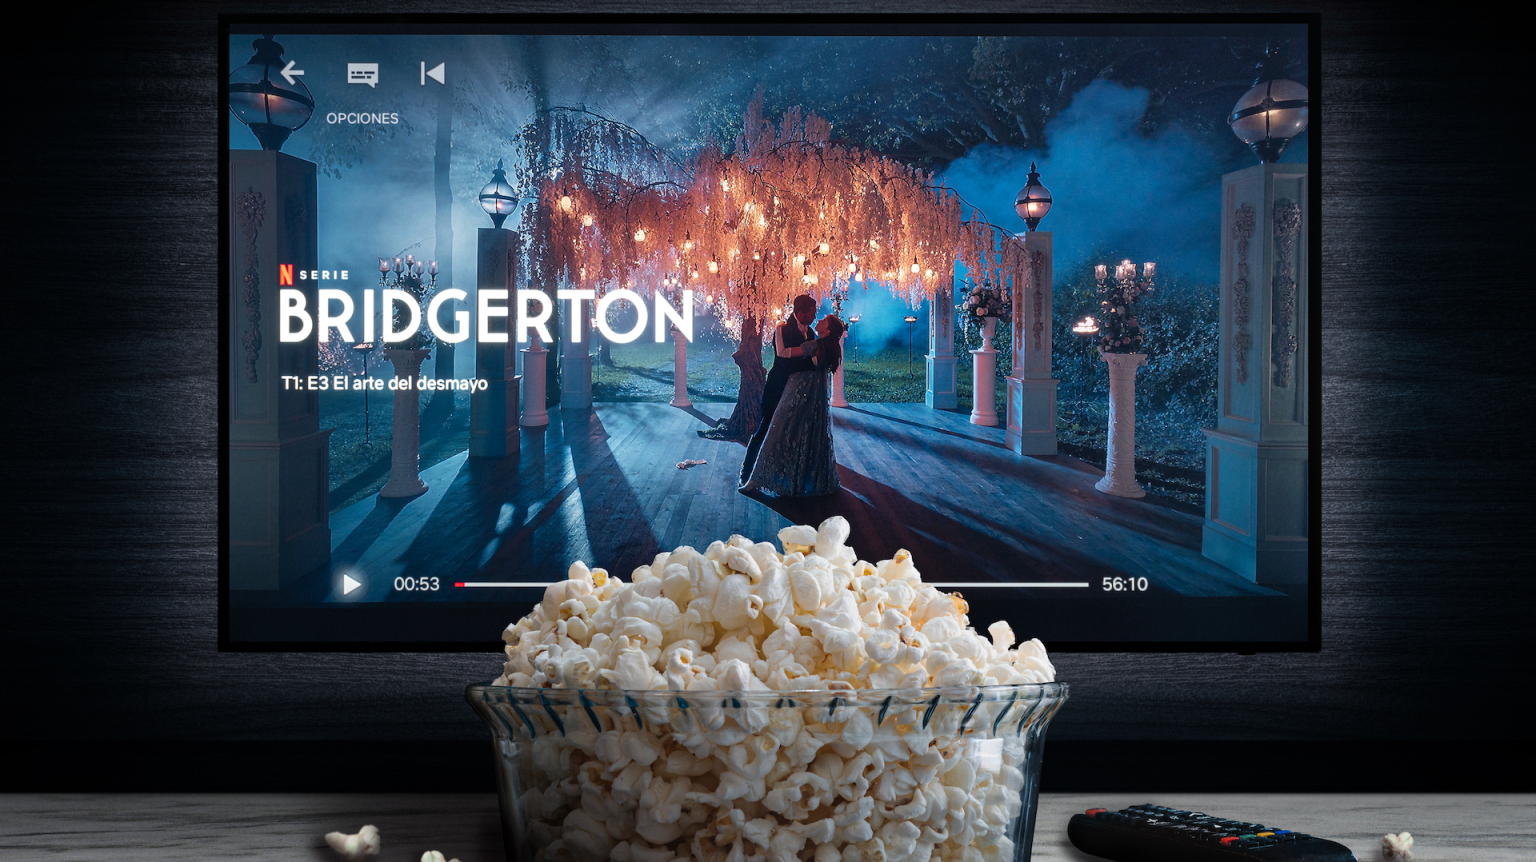 A TV screen is paused on the Netflix show "Bridgerton" with a bowl of popcorn sitting in front of it.